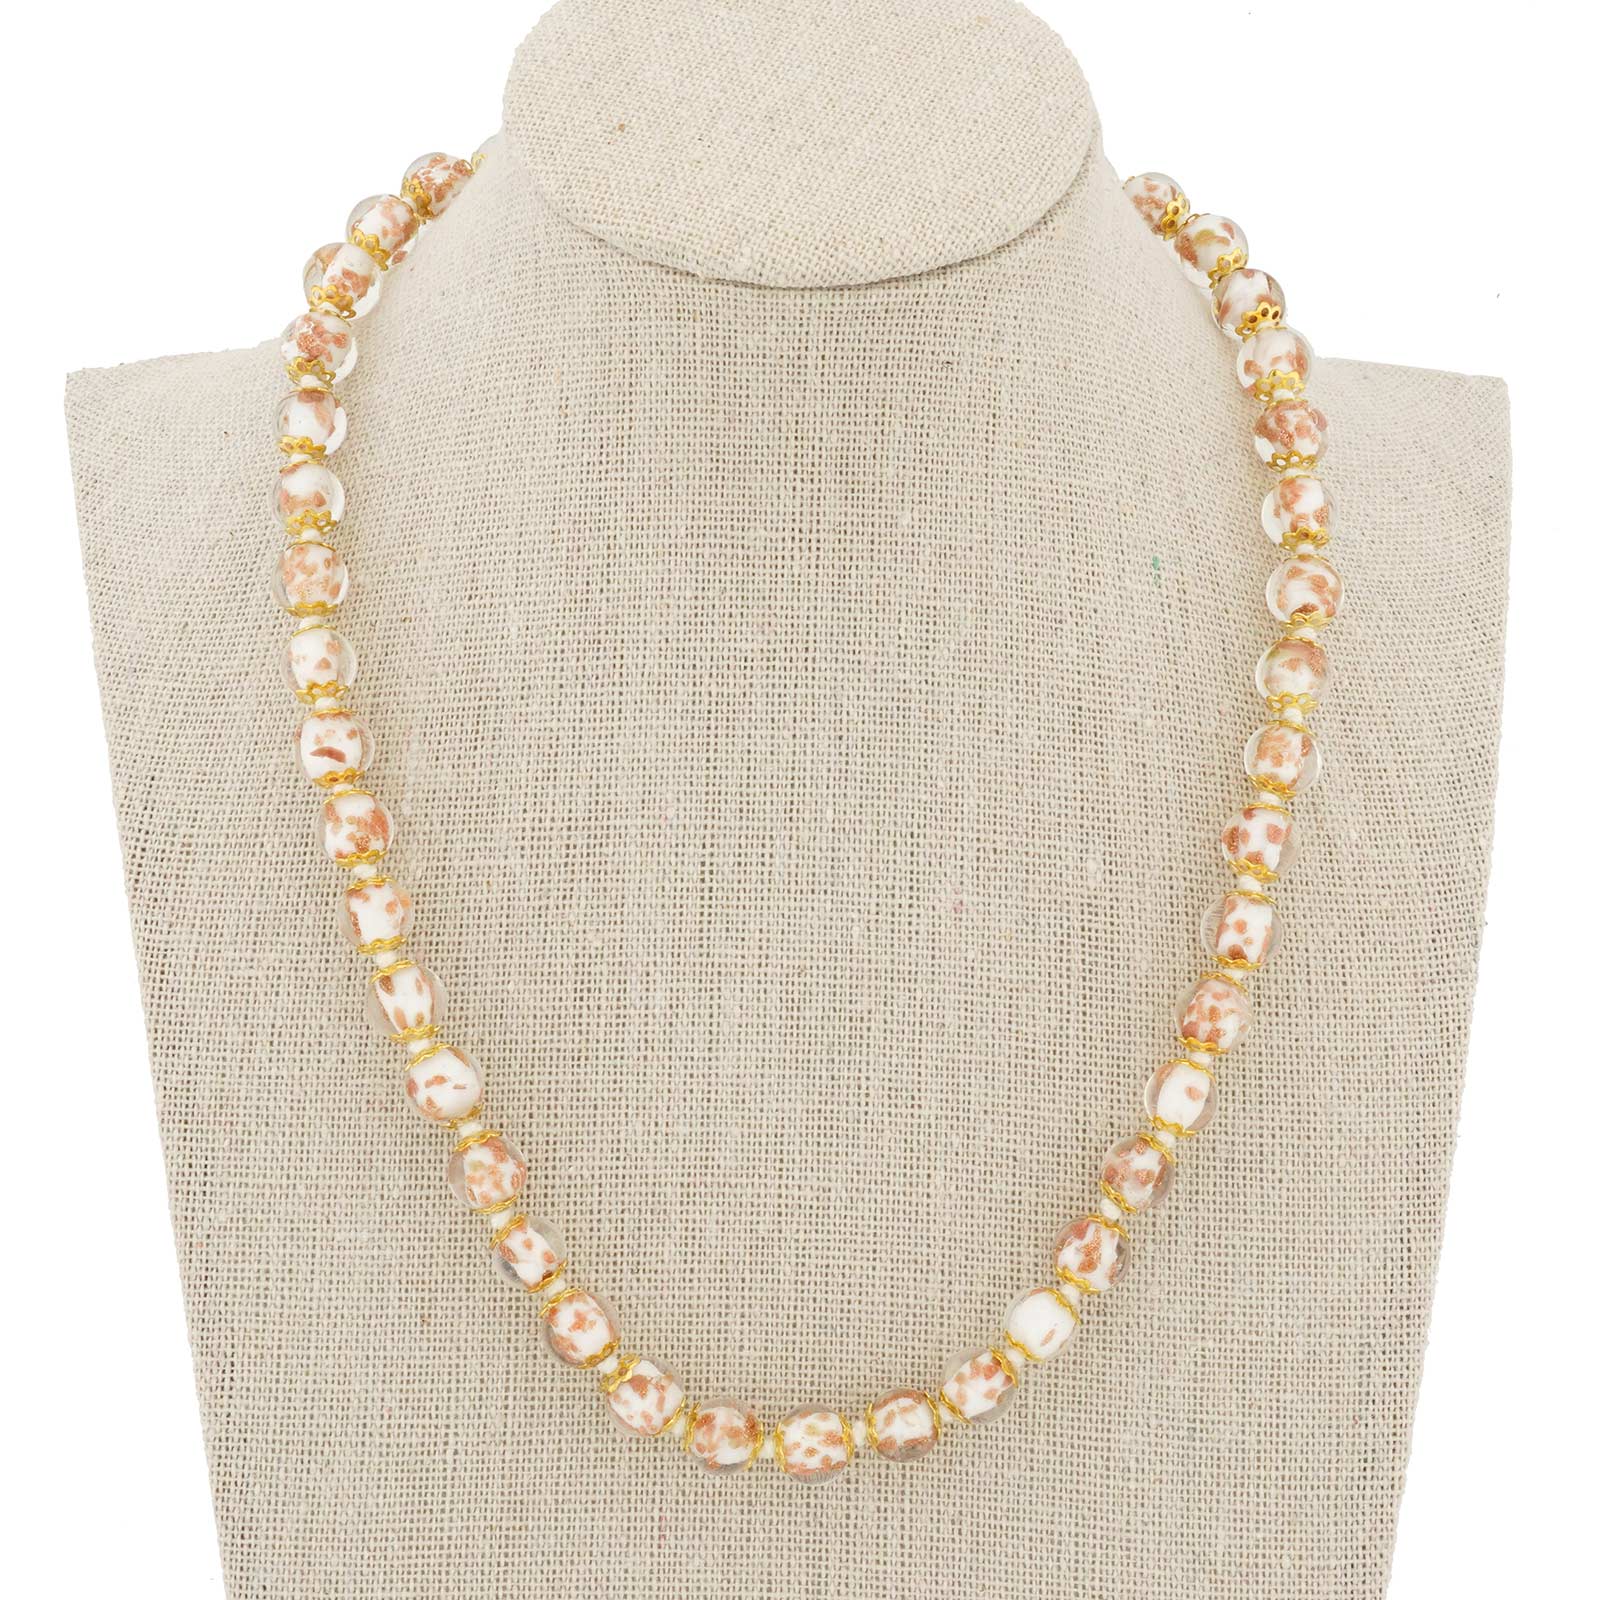 Sommerso Necklace - Milky White